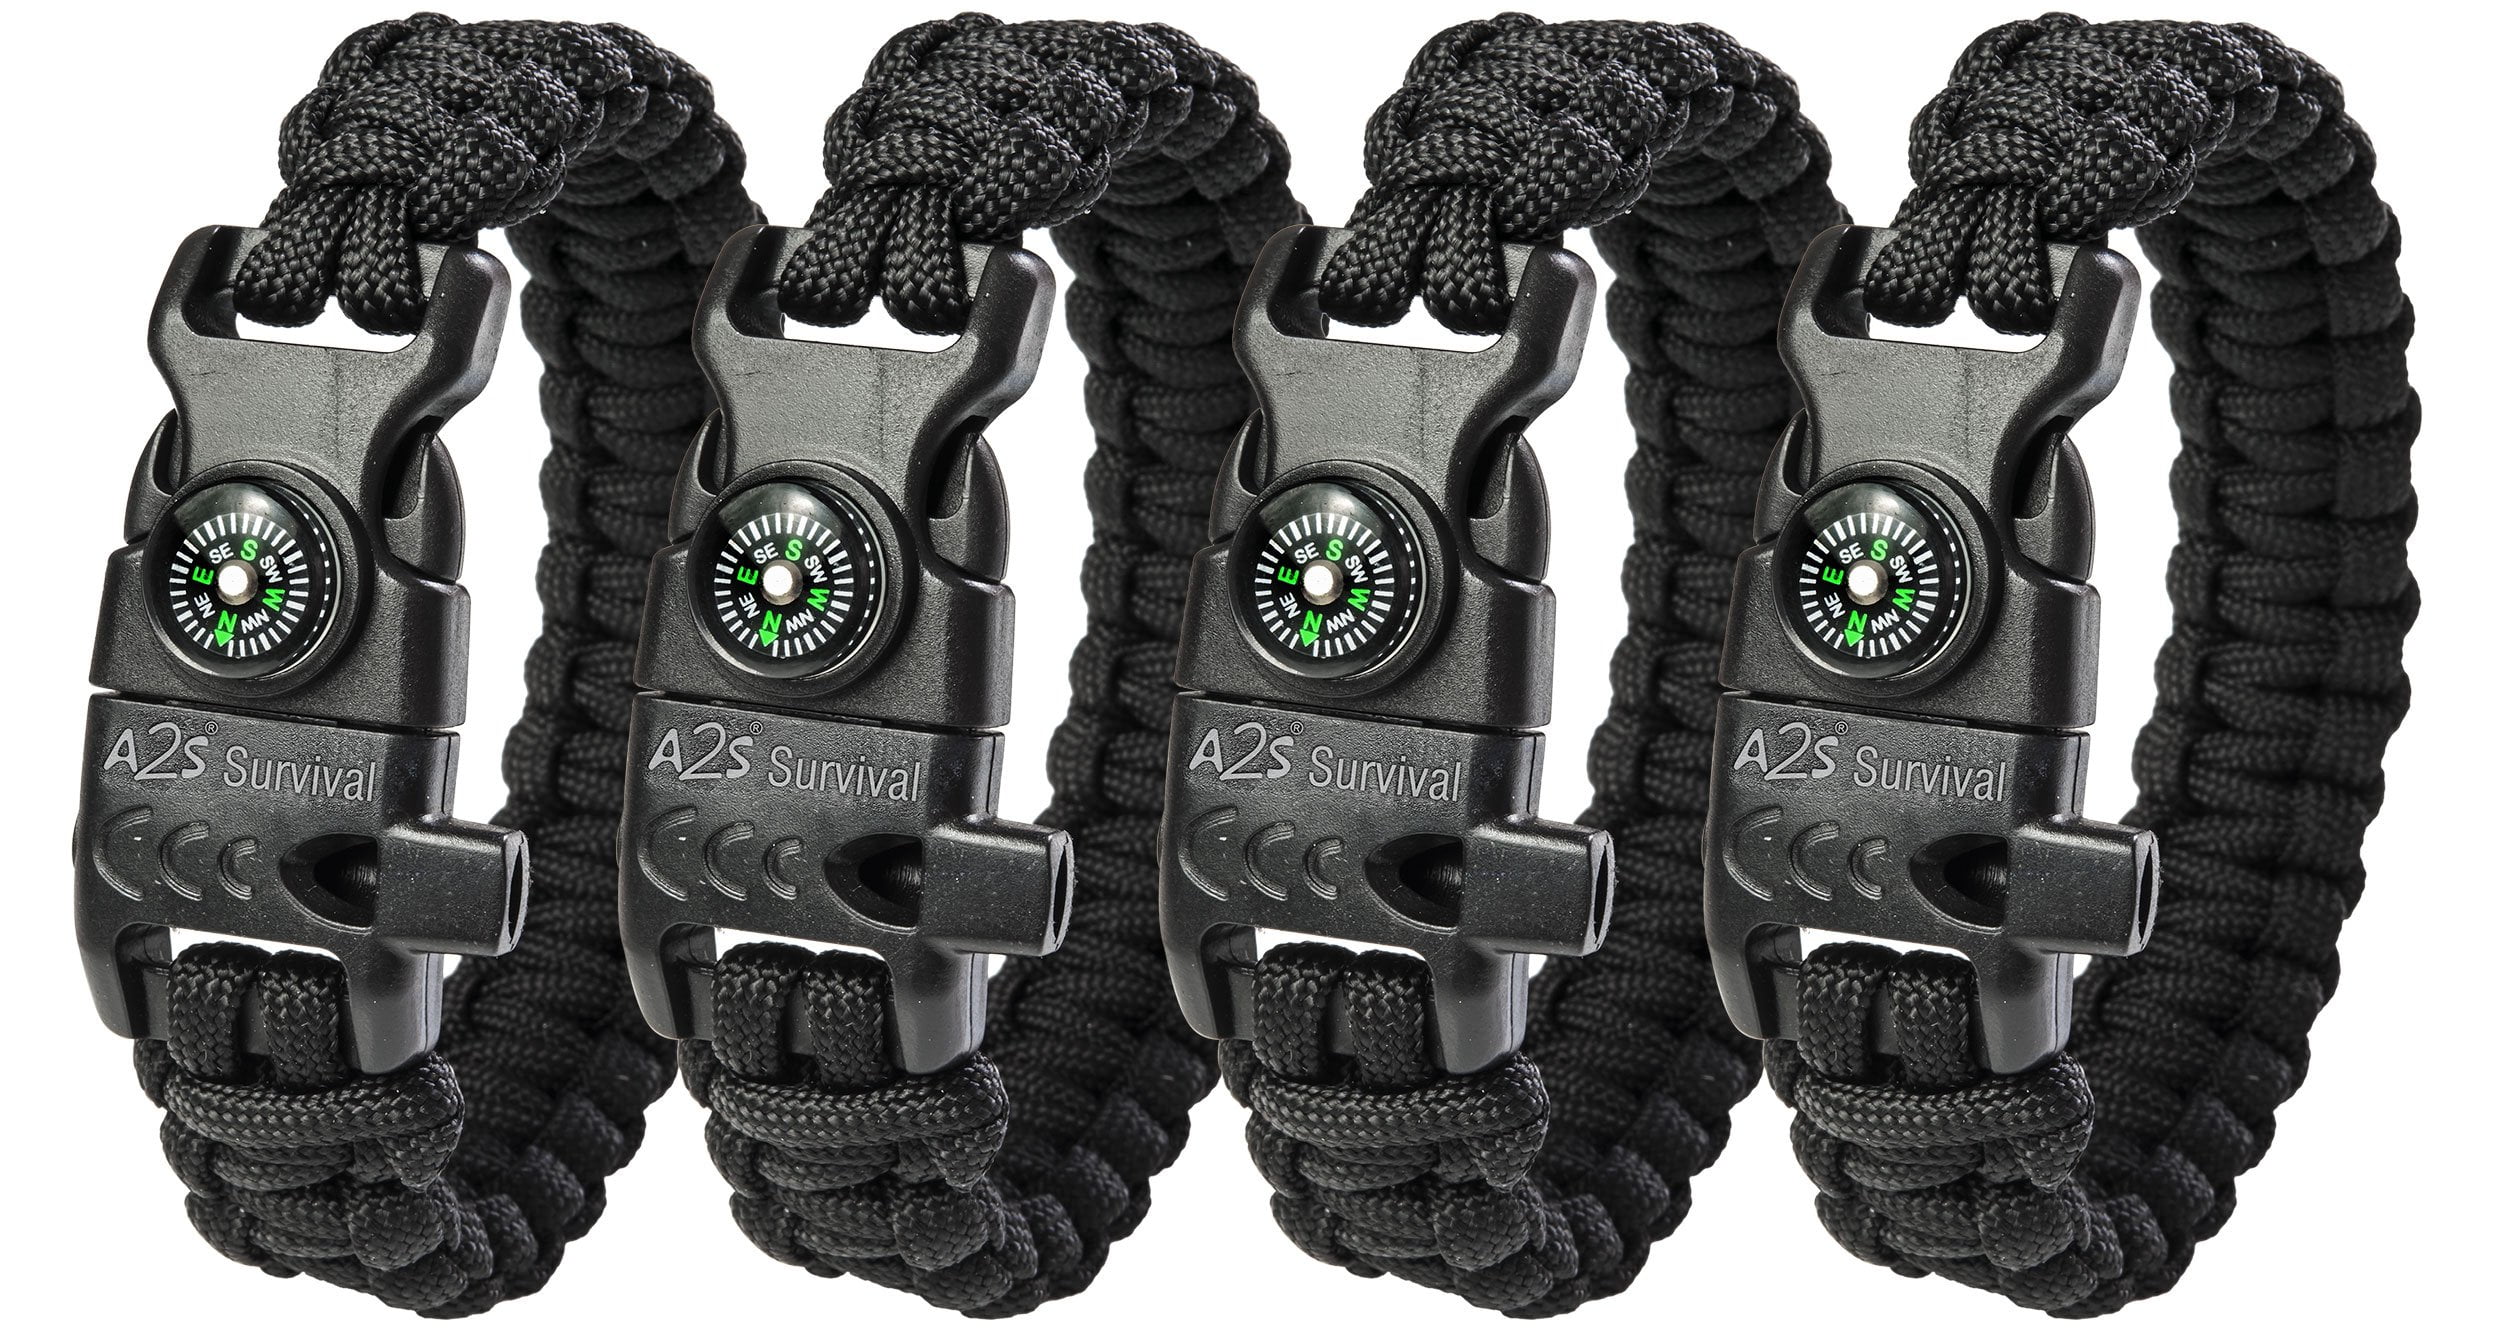 A2S Protection Paracord Bracelet K2-Peak - Survival Gear Kit with Embedded  Compass, Fire Starter, Emergency Knife & Whistle (Green / Green 8) 